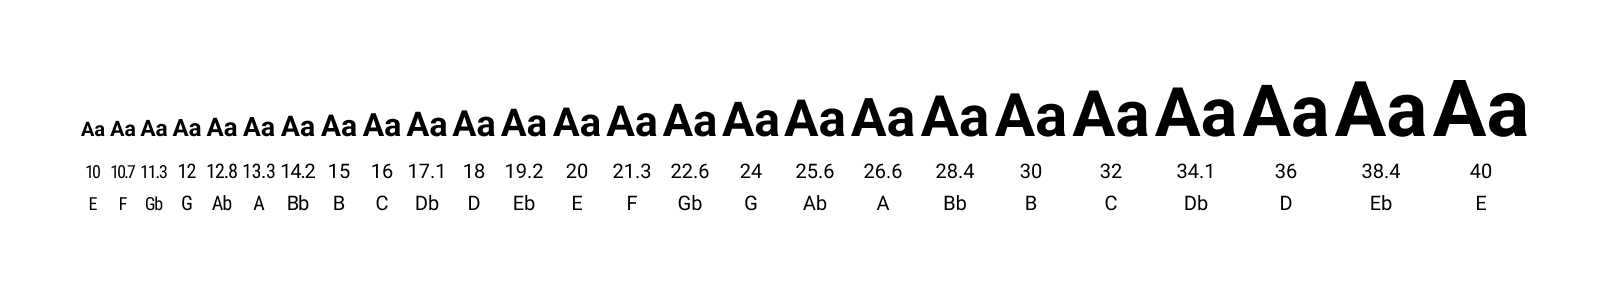 Type scale visualization for the above table